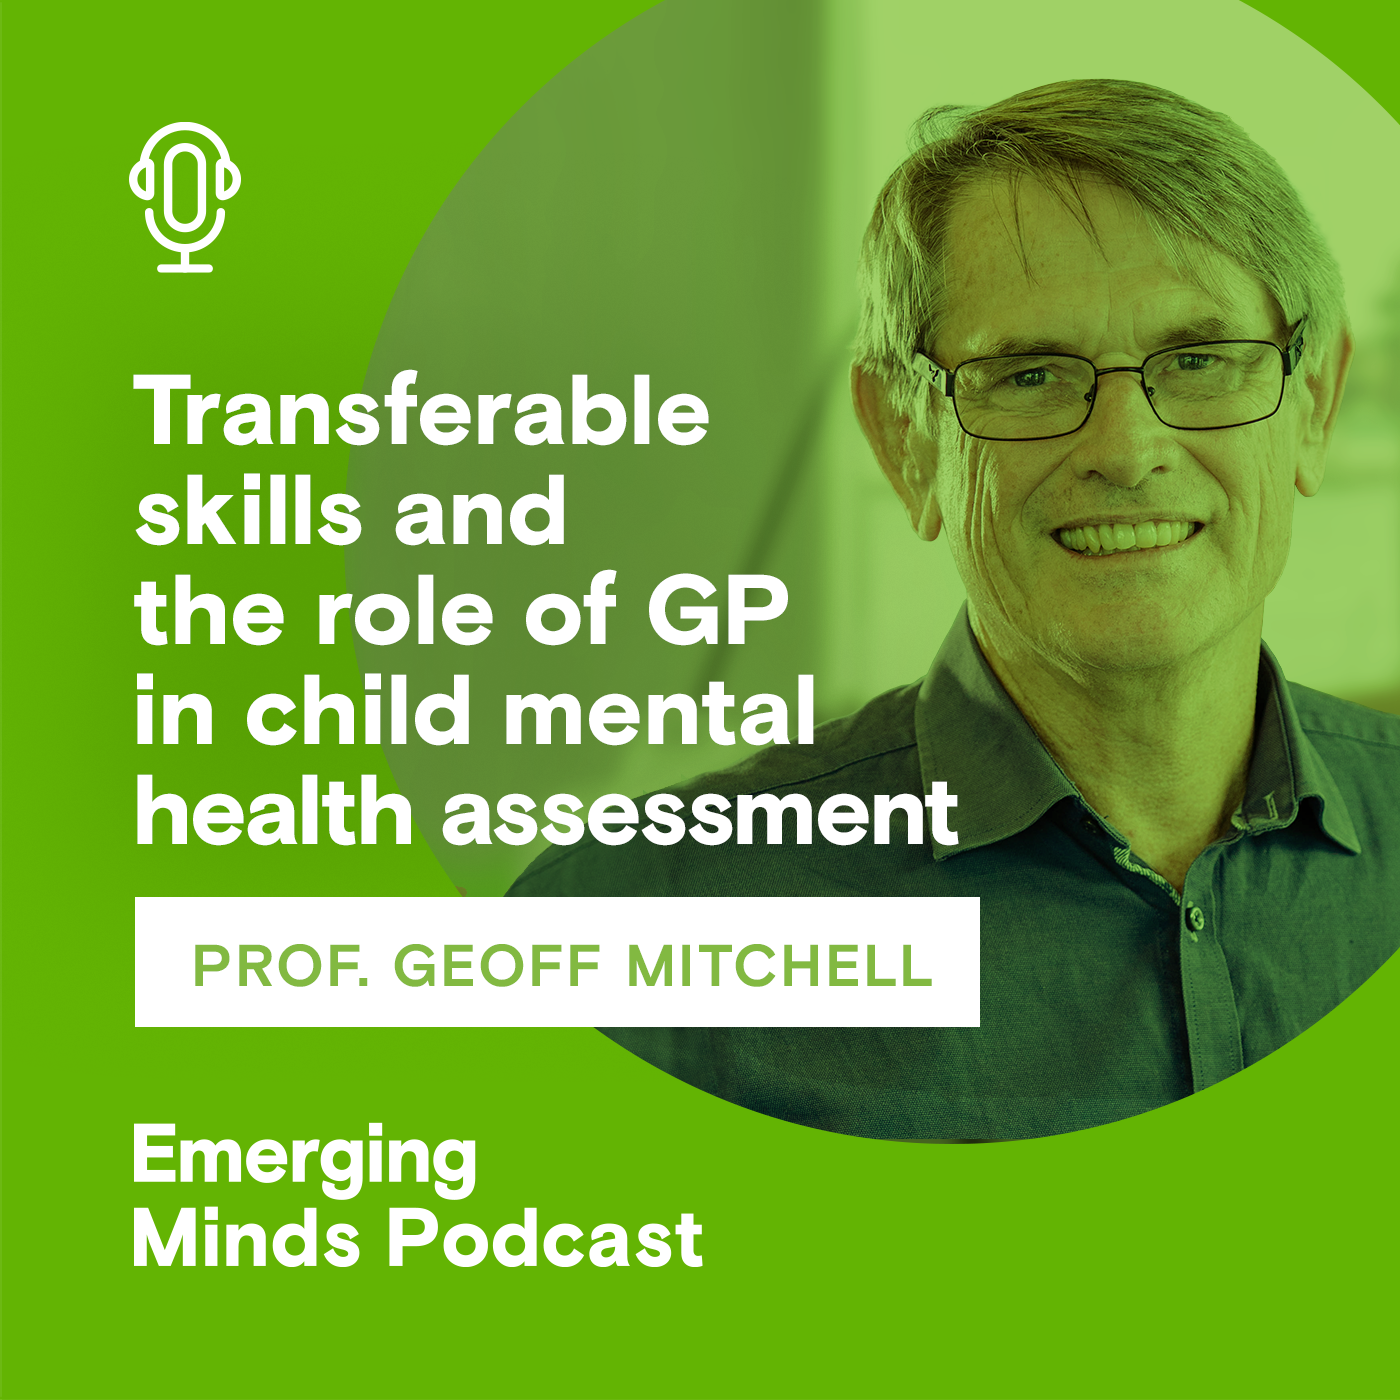 Transferable skills and the role of GPs in child mental health assessment